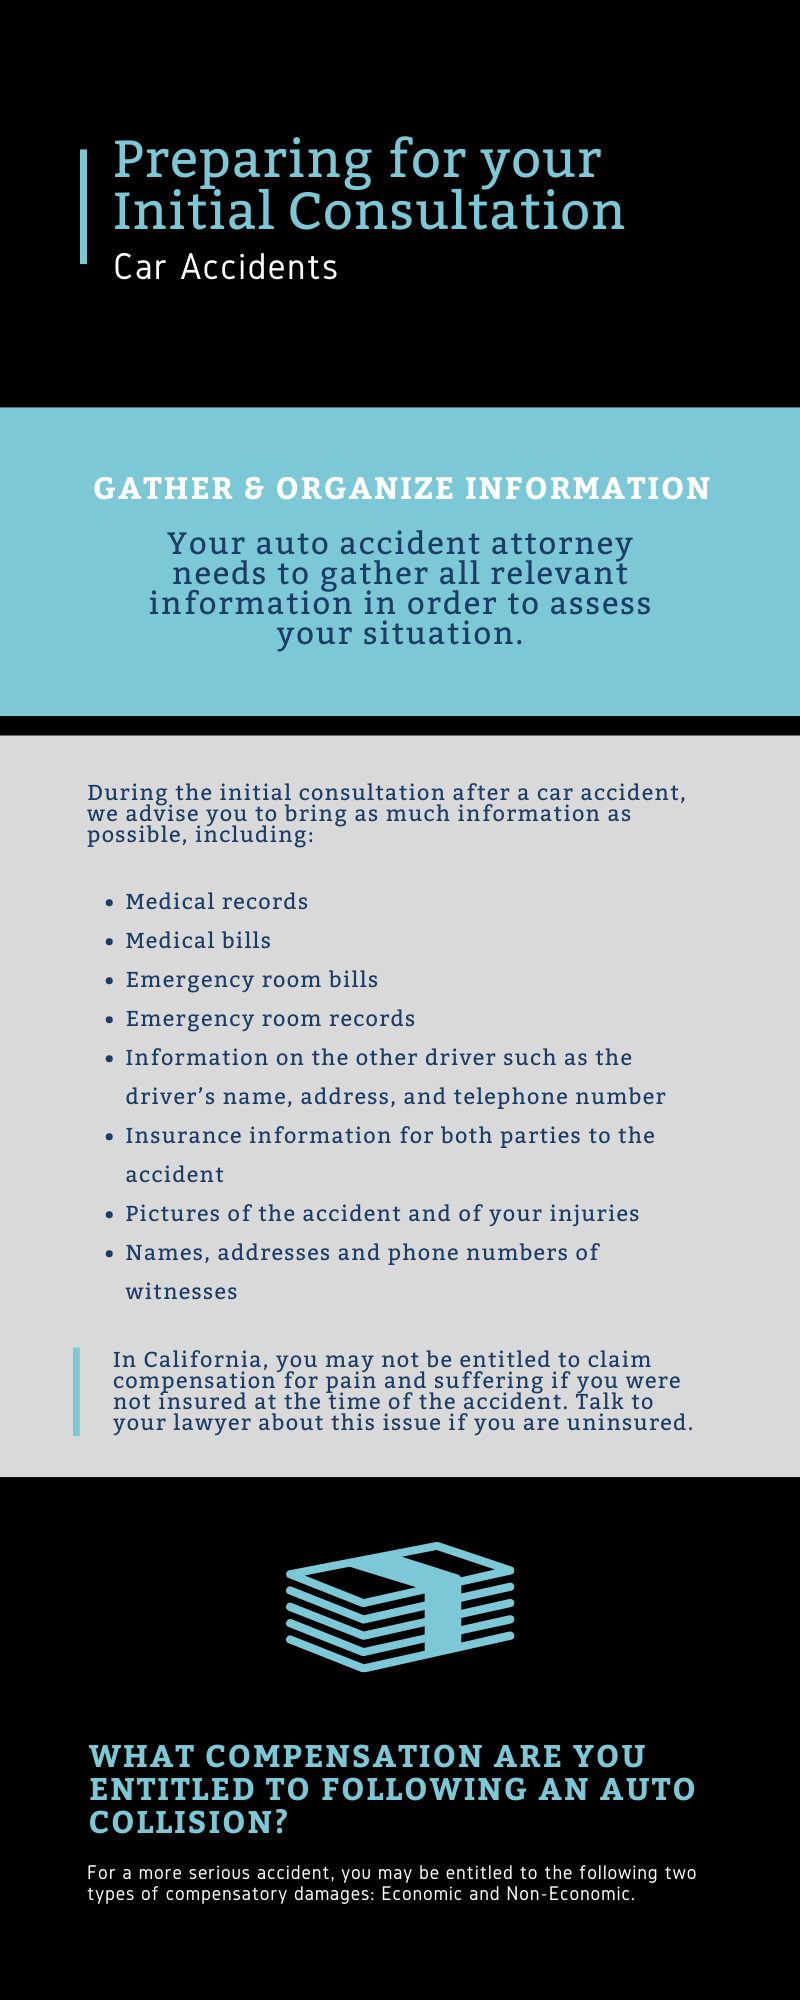 Preparing For You Initial Car Accident Consultation Infographic